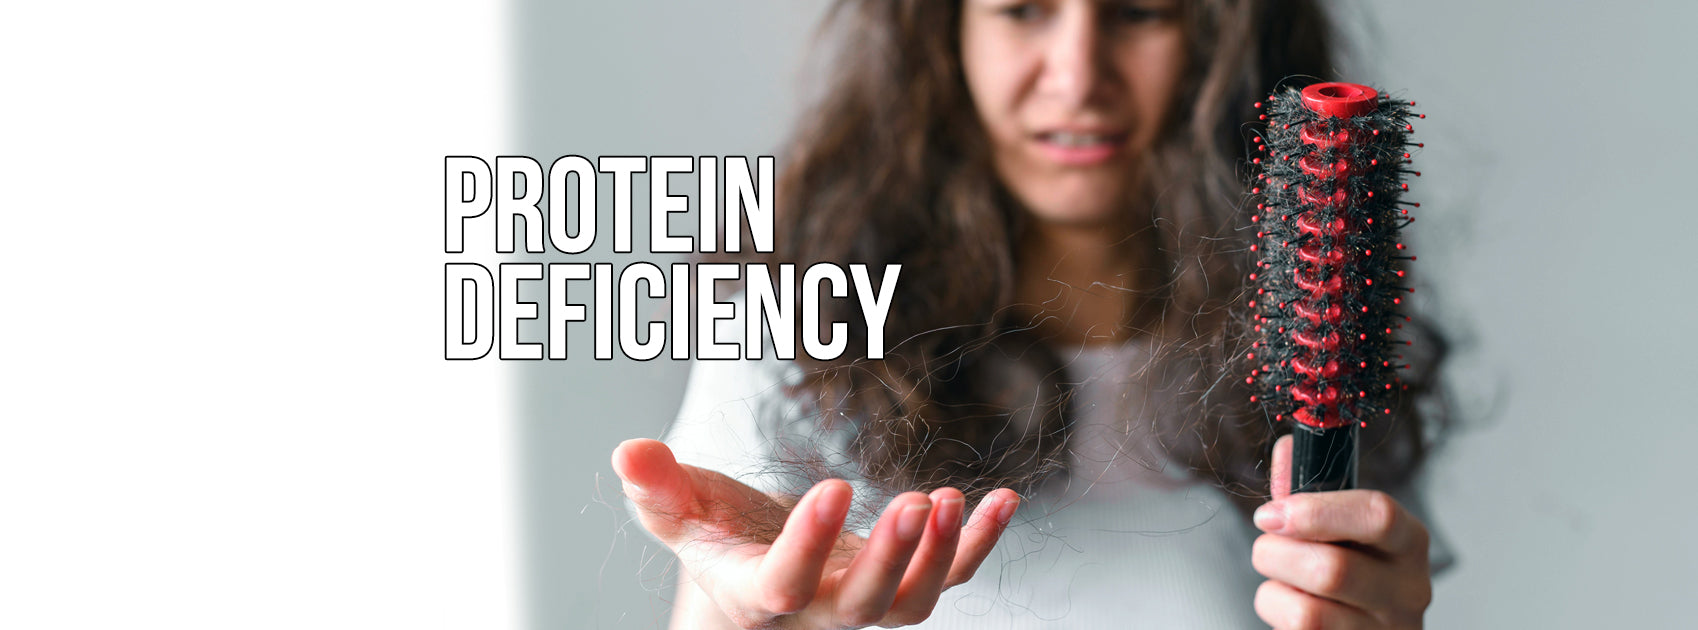 PROTEIN DEFICIENCY: SYMPTOMS, CAUSES & HOW TO TREAT